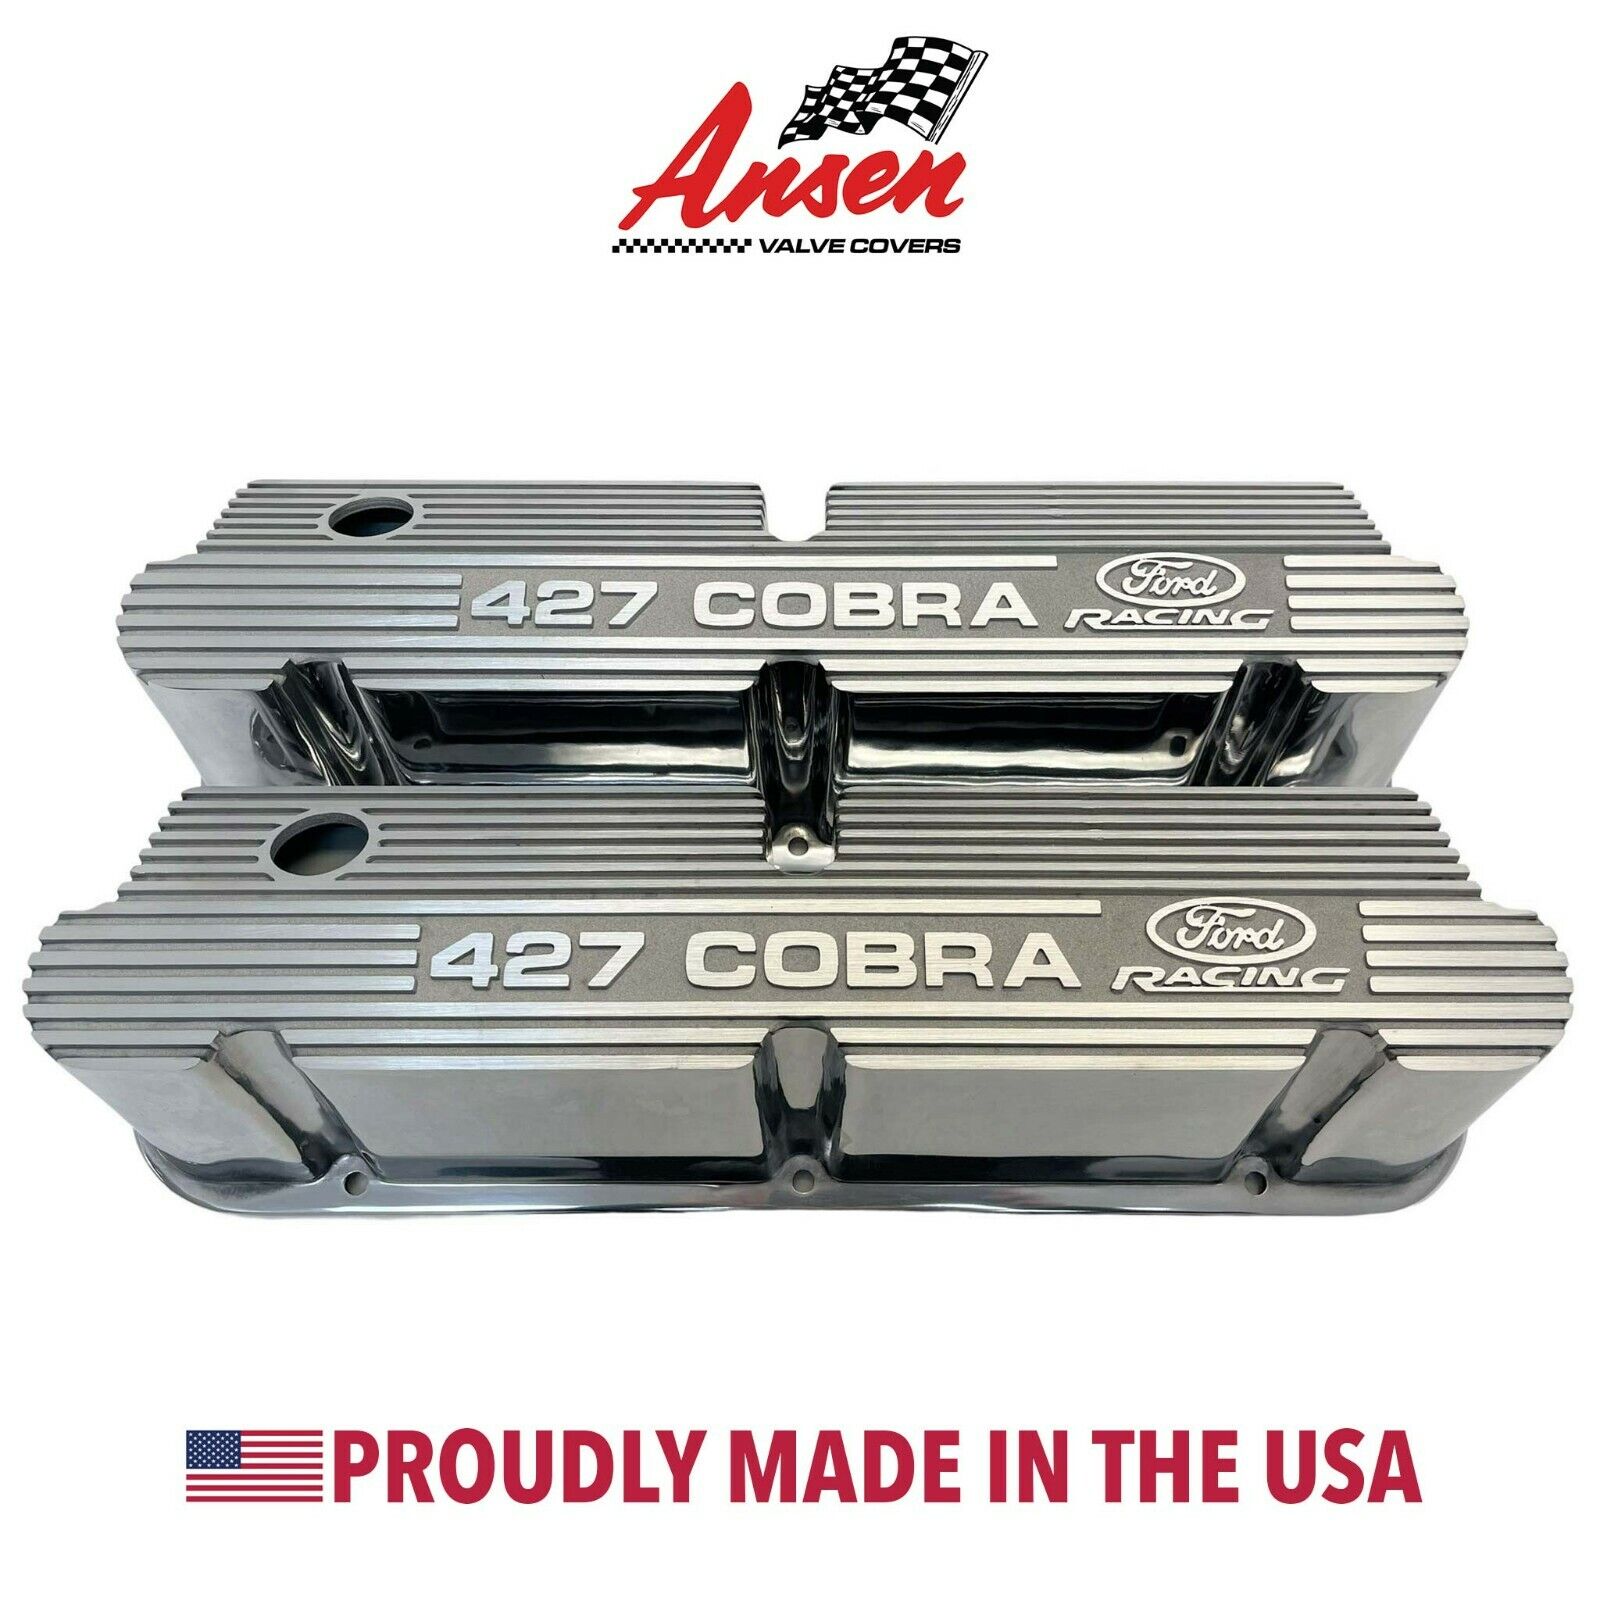 Ford Pentroof 427 Cobra Valve Covers - Polished - New Old Stock, #M-6582-W427P